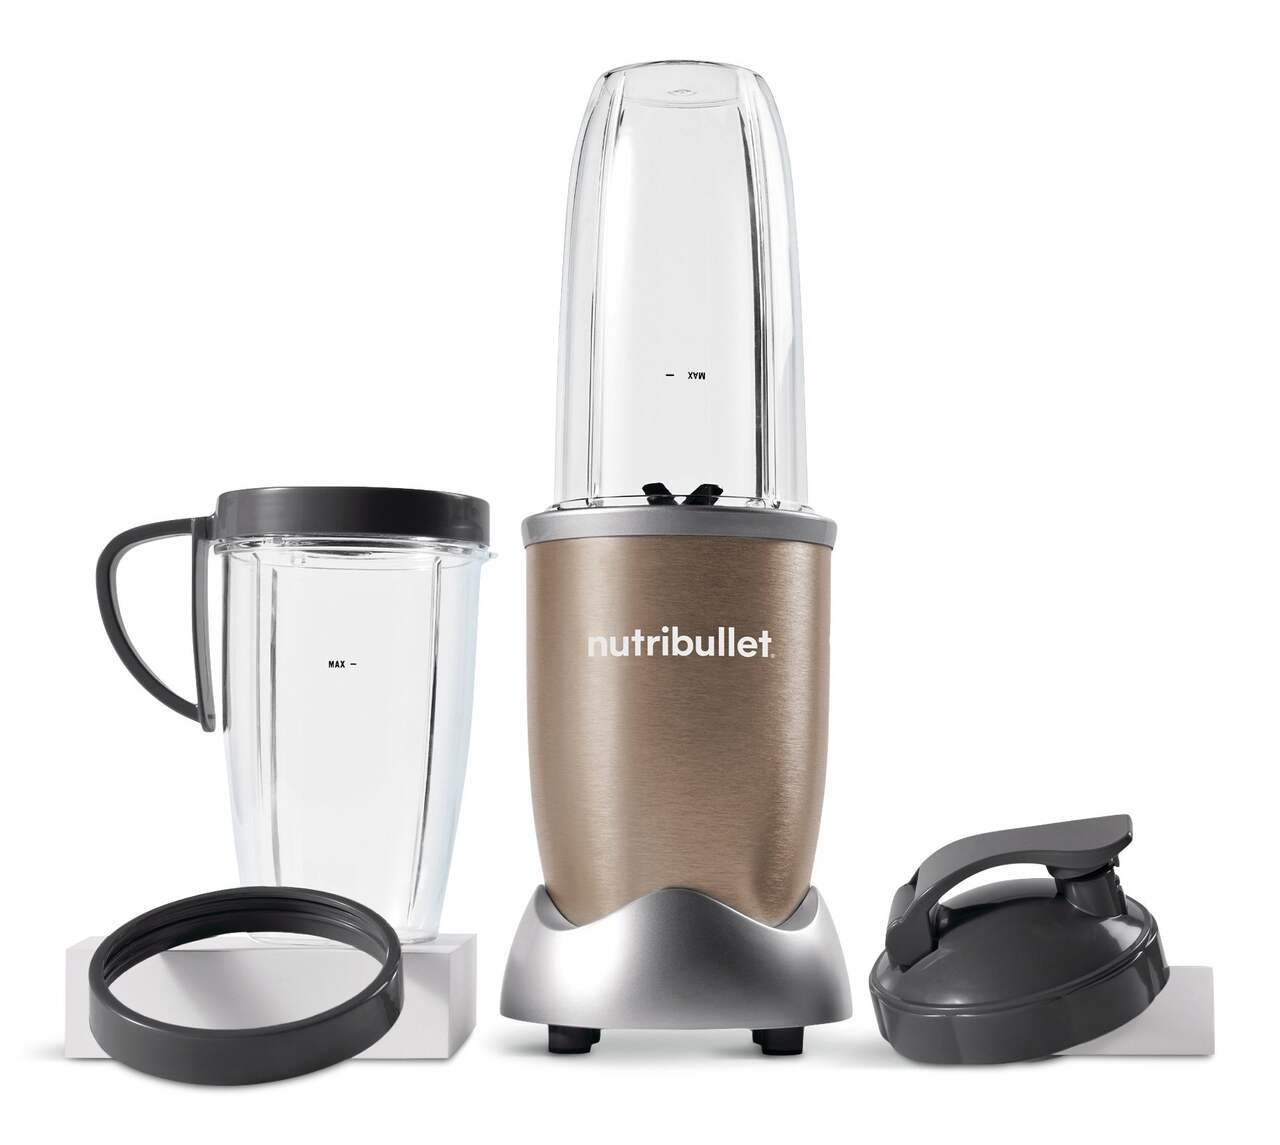 https://media-www.canadiantire.ca/product/living/kitchen/kitchen-appliances/0432293/nutribullet-pro-900-5ded46c2-06b8-4a05-9ef9-772a8fd65e0d-jpgrendition.jpg?imdensity=1&imwidth=640&impolicy=mZoom